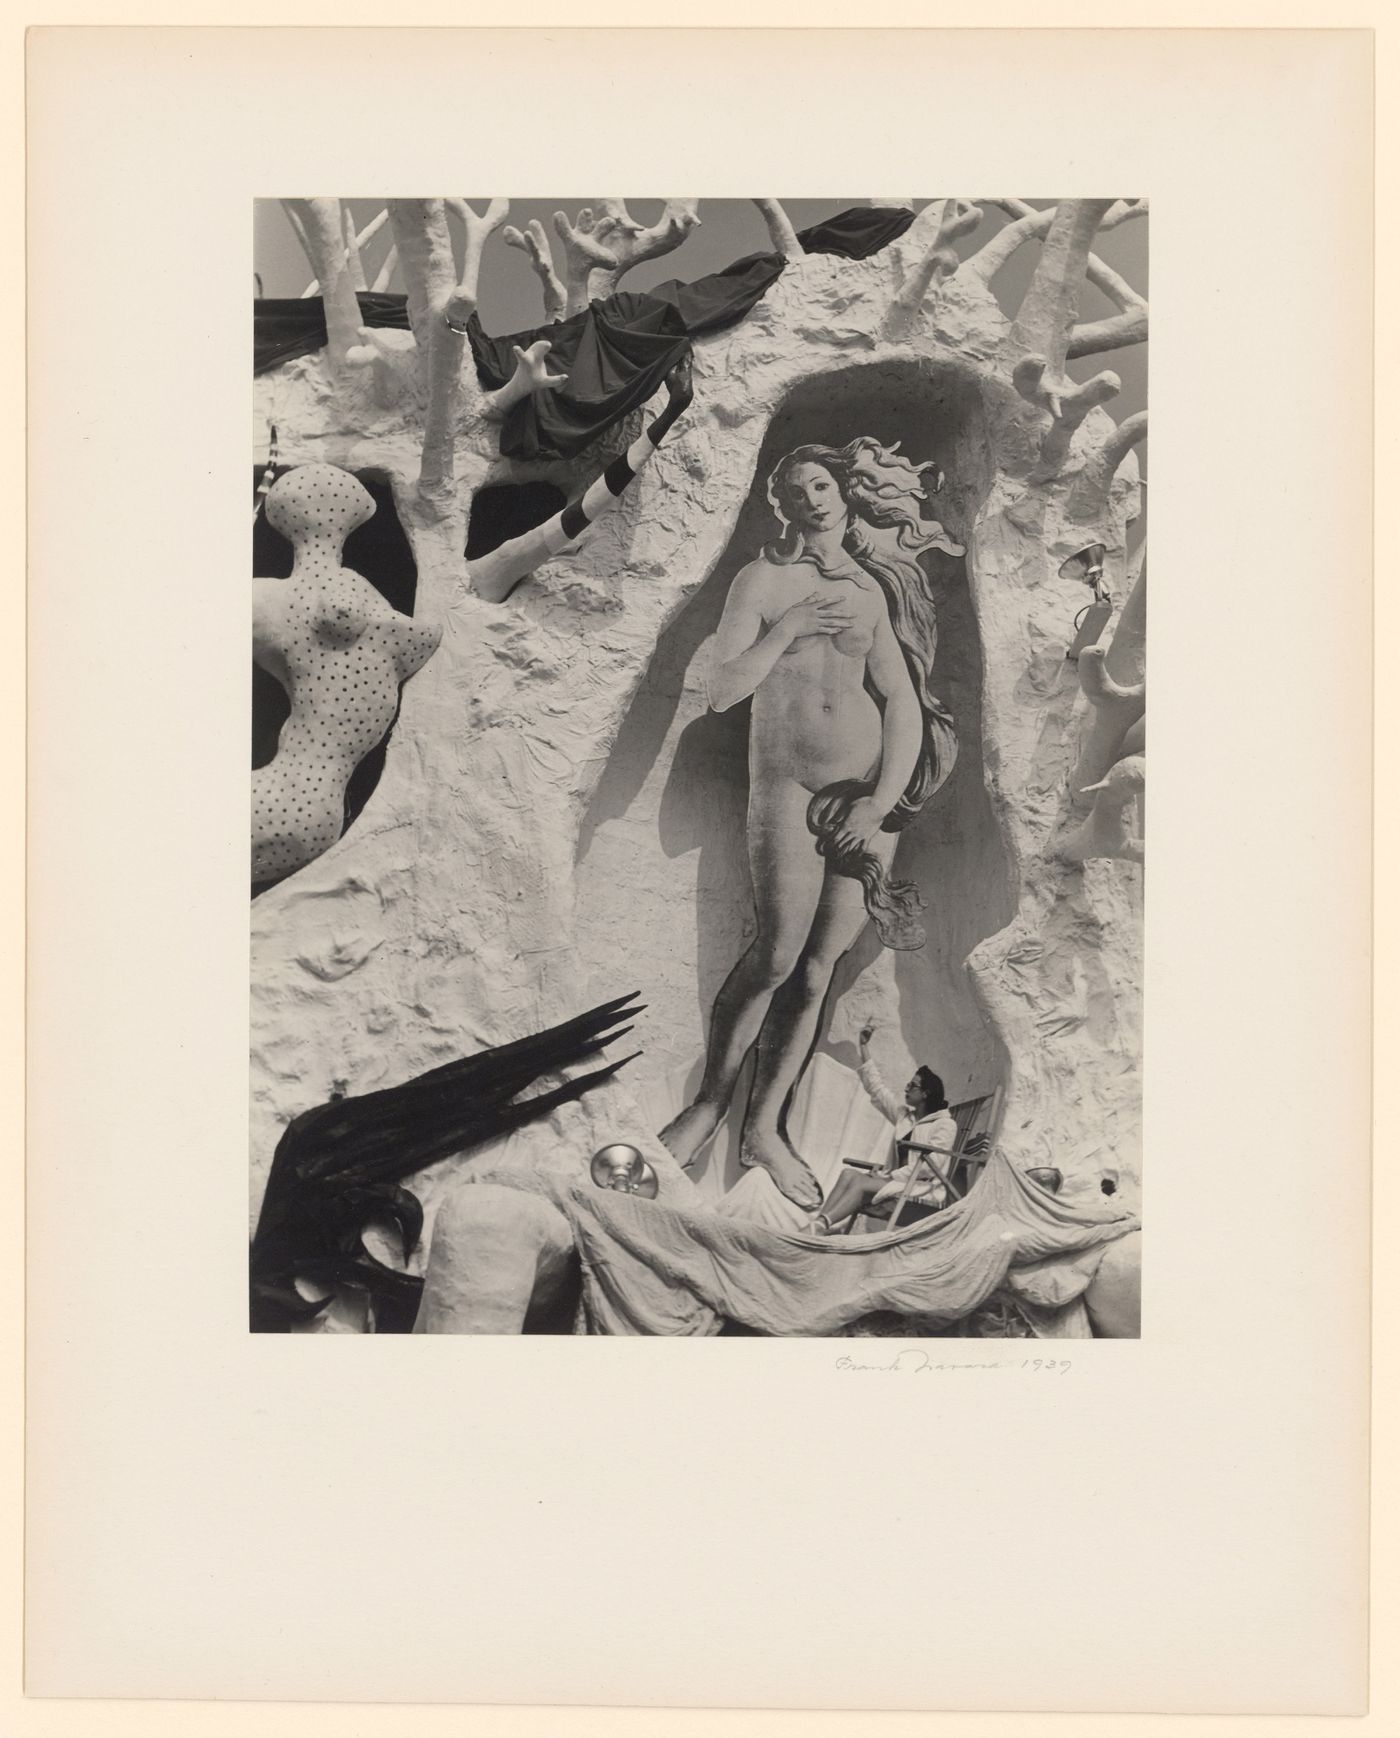 New York World's Fair (1939-1940): Woman seated on canvas chair, gesturing at cut-out of Venus, "Dream of Venus" sculpture